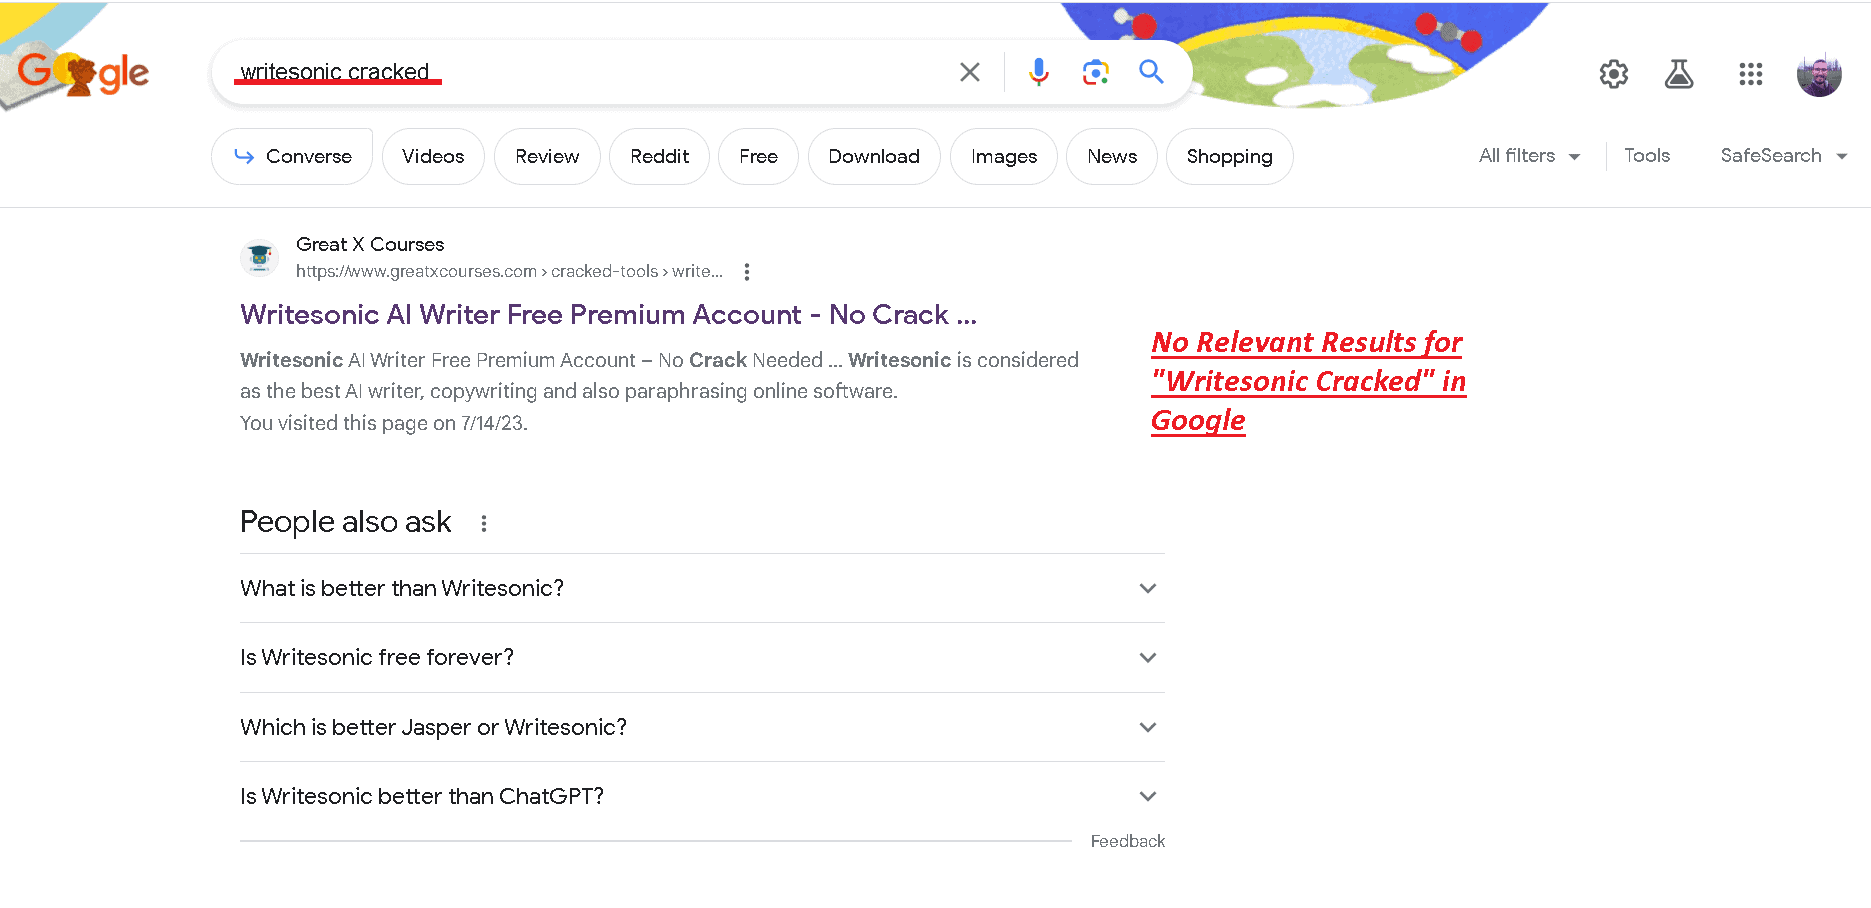 Writesonic cracked no results in Google